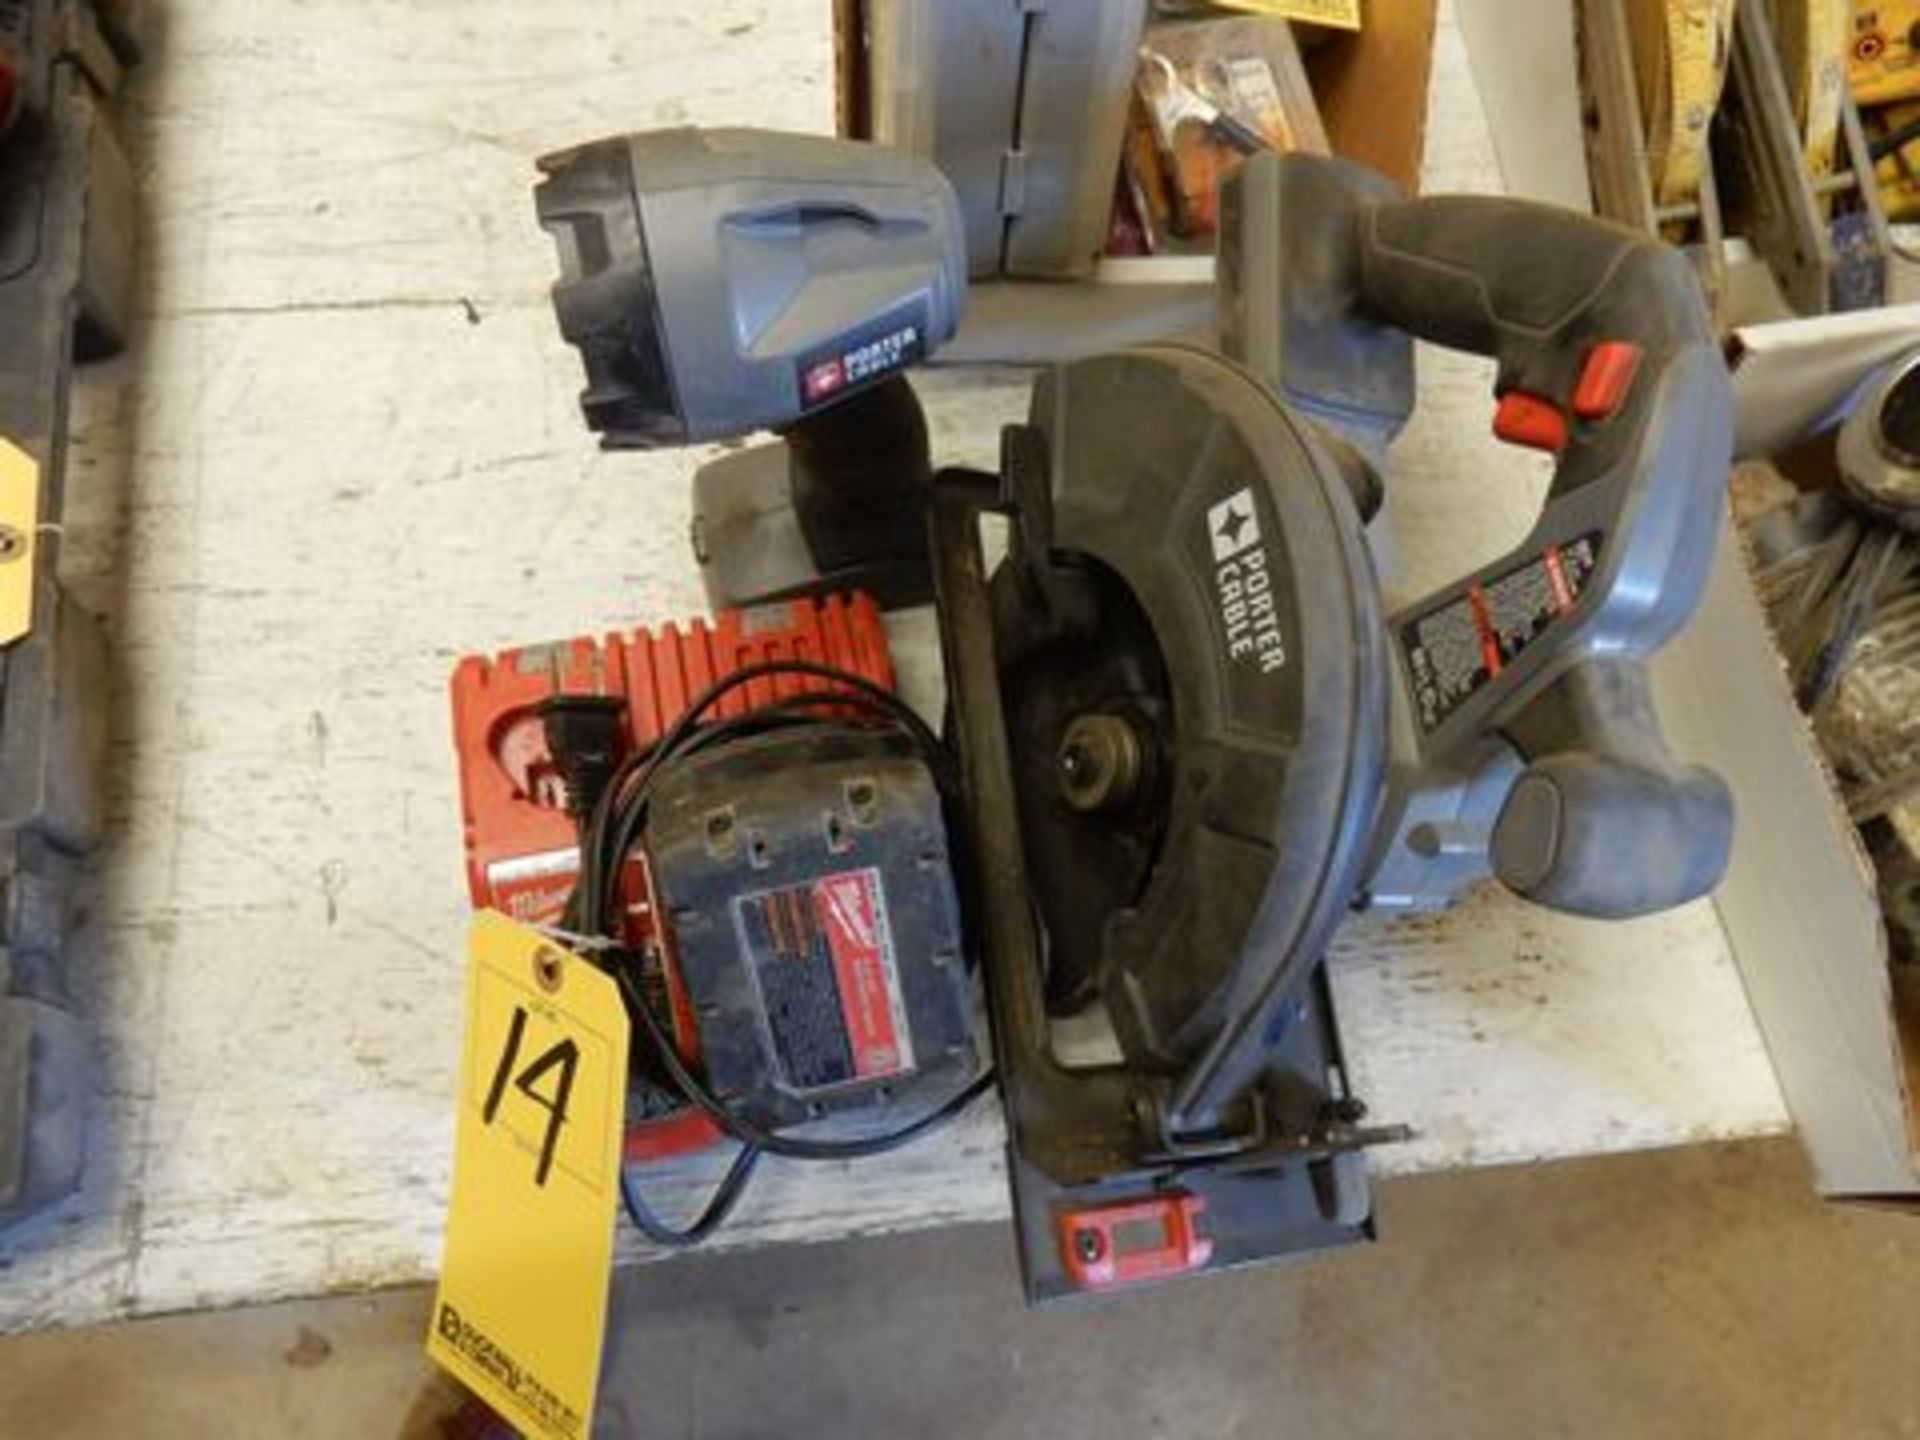 LOT MISC. MILWAUKEE & PORTER CABLE CORDLESS TOOLS TO INCLUDE: FLASHLIGHT, CIRCULAR SAW, CHARGER, ETC